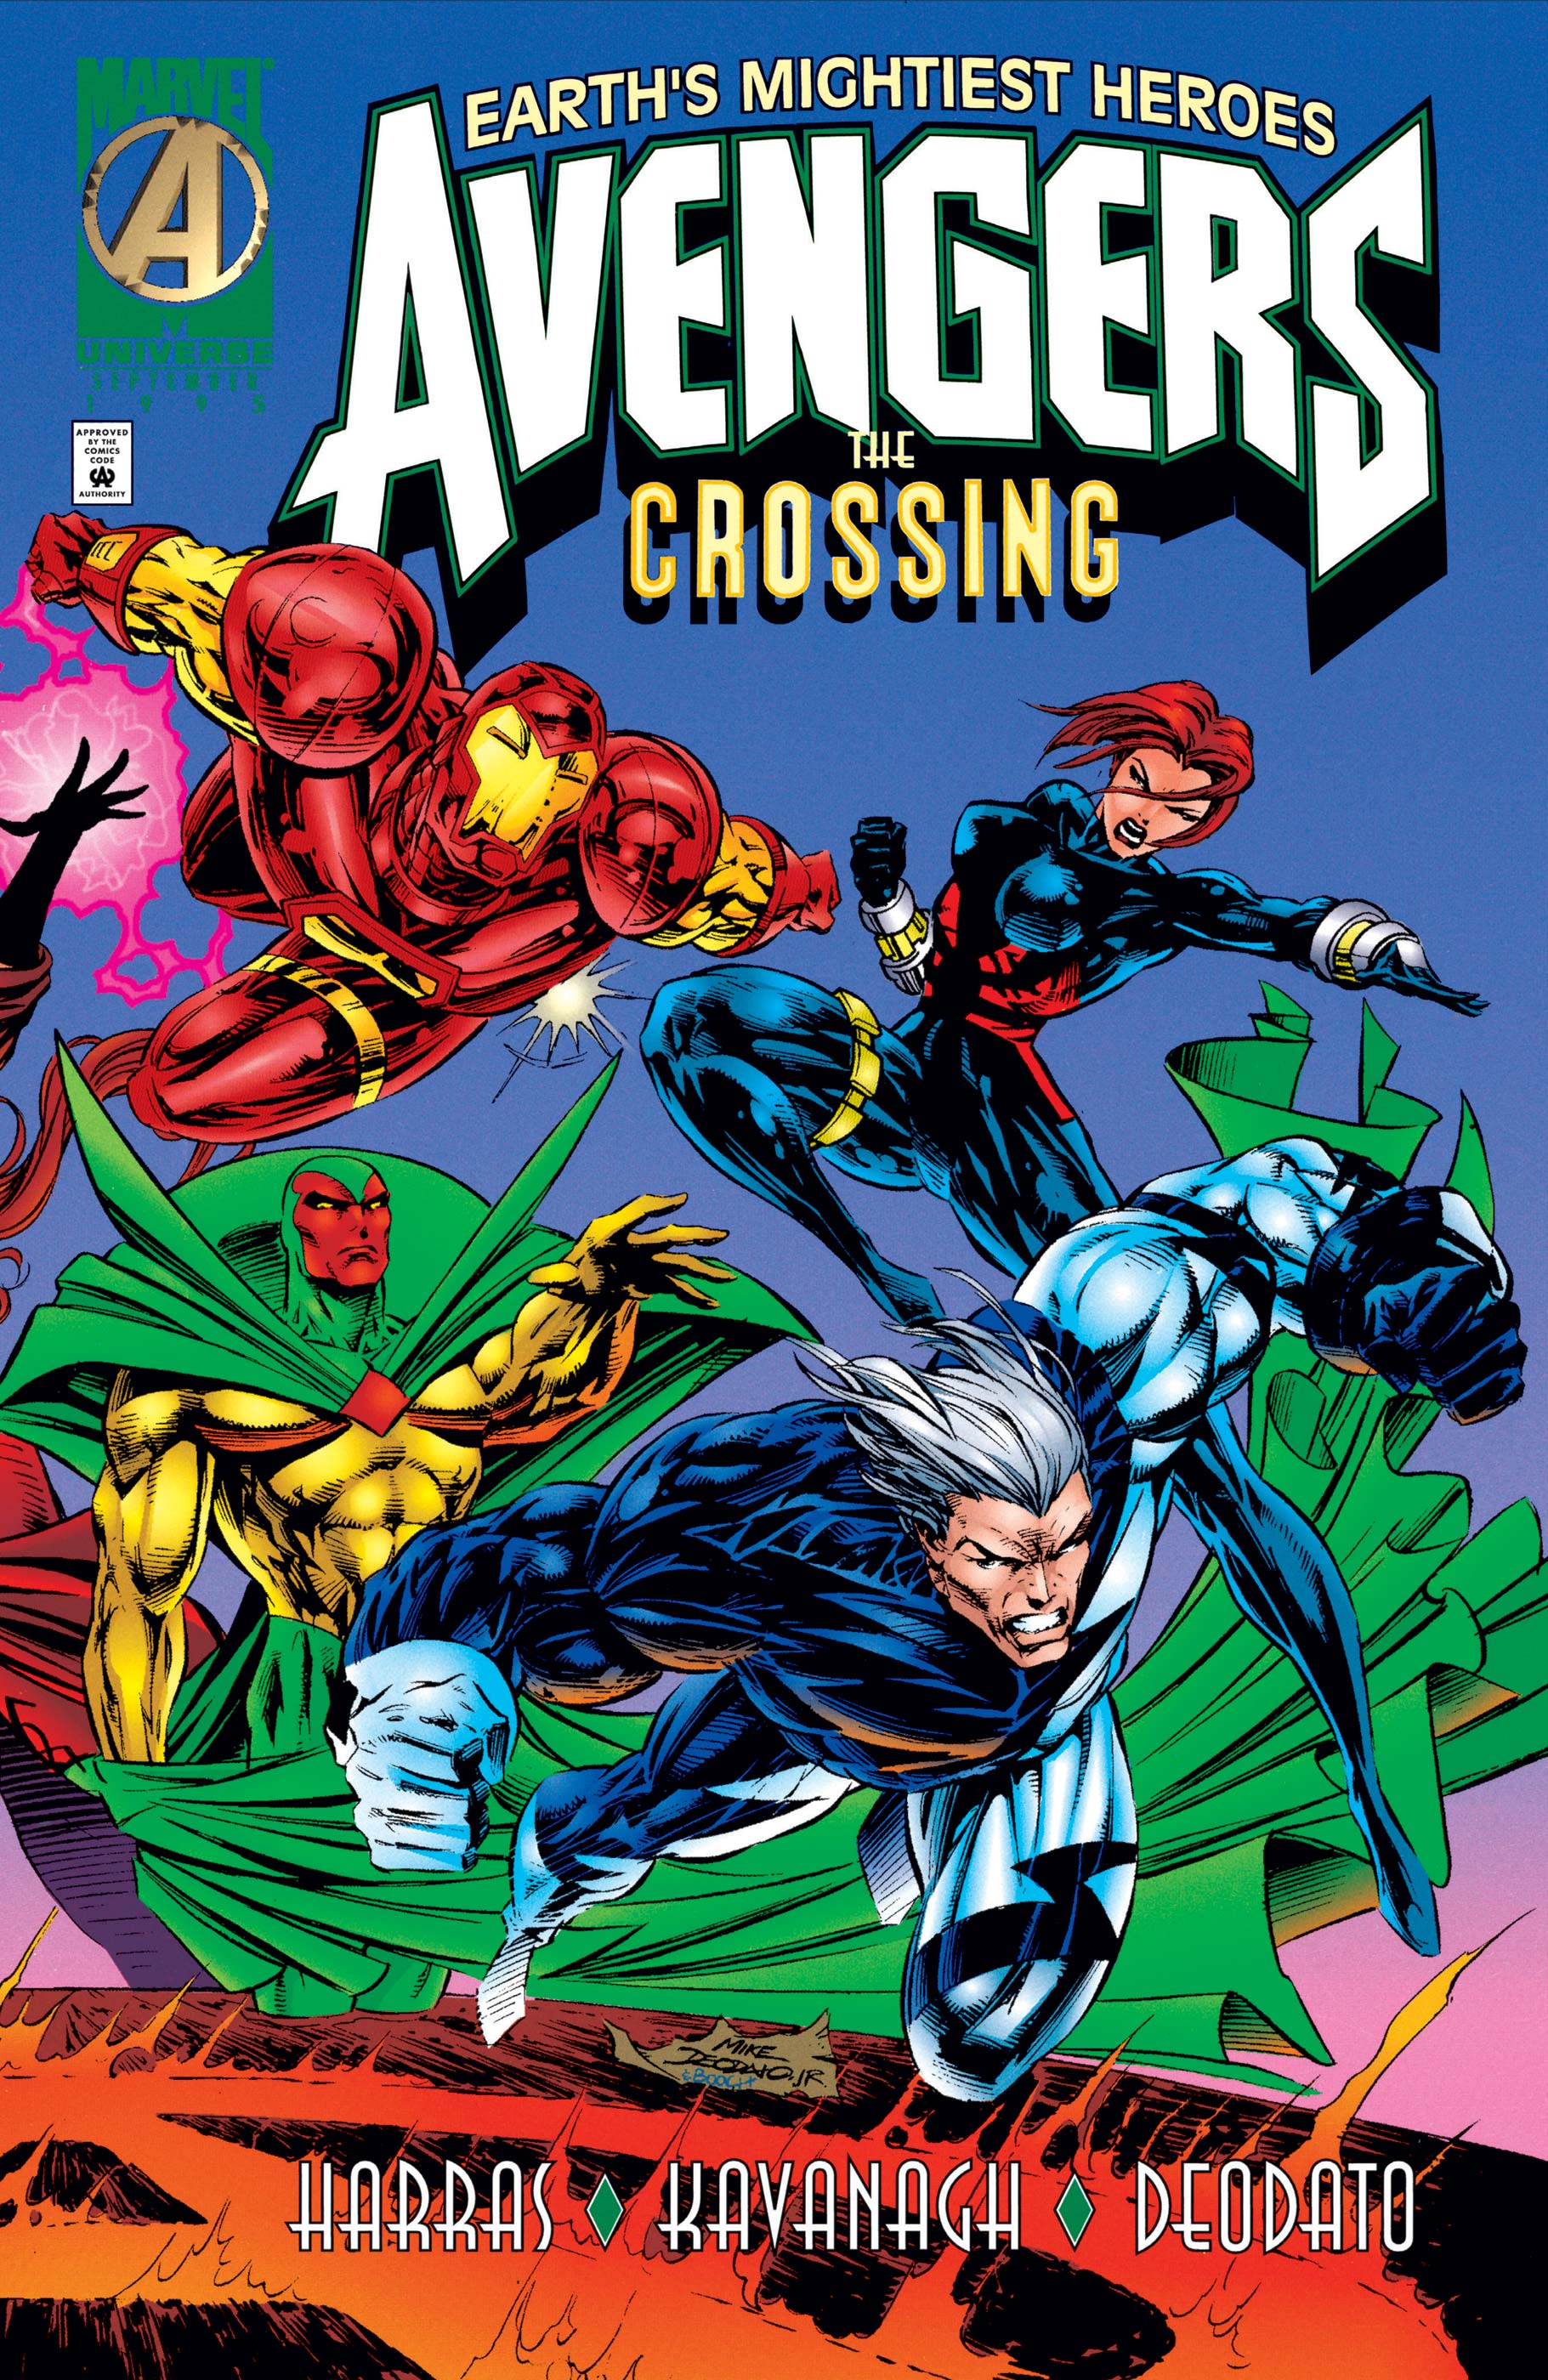 Avengers: The Crossing (1995) #1 | Comic Issues | Marvel